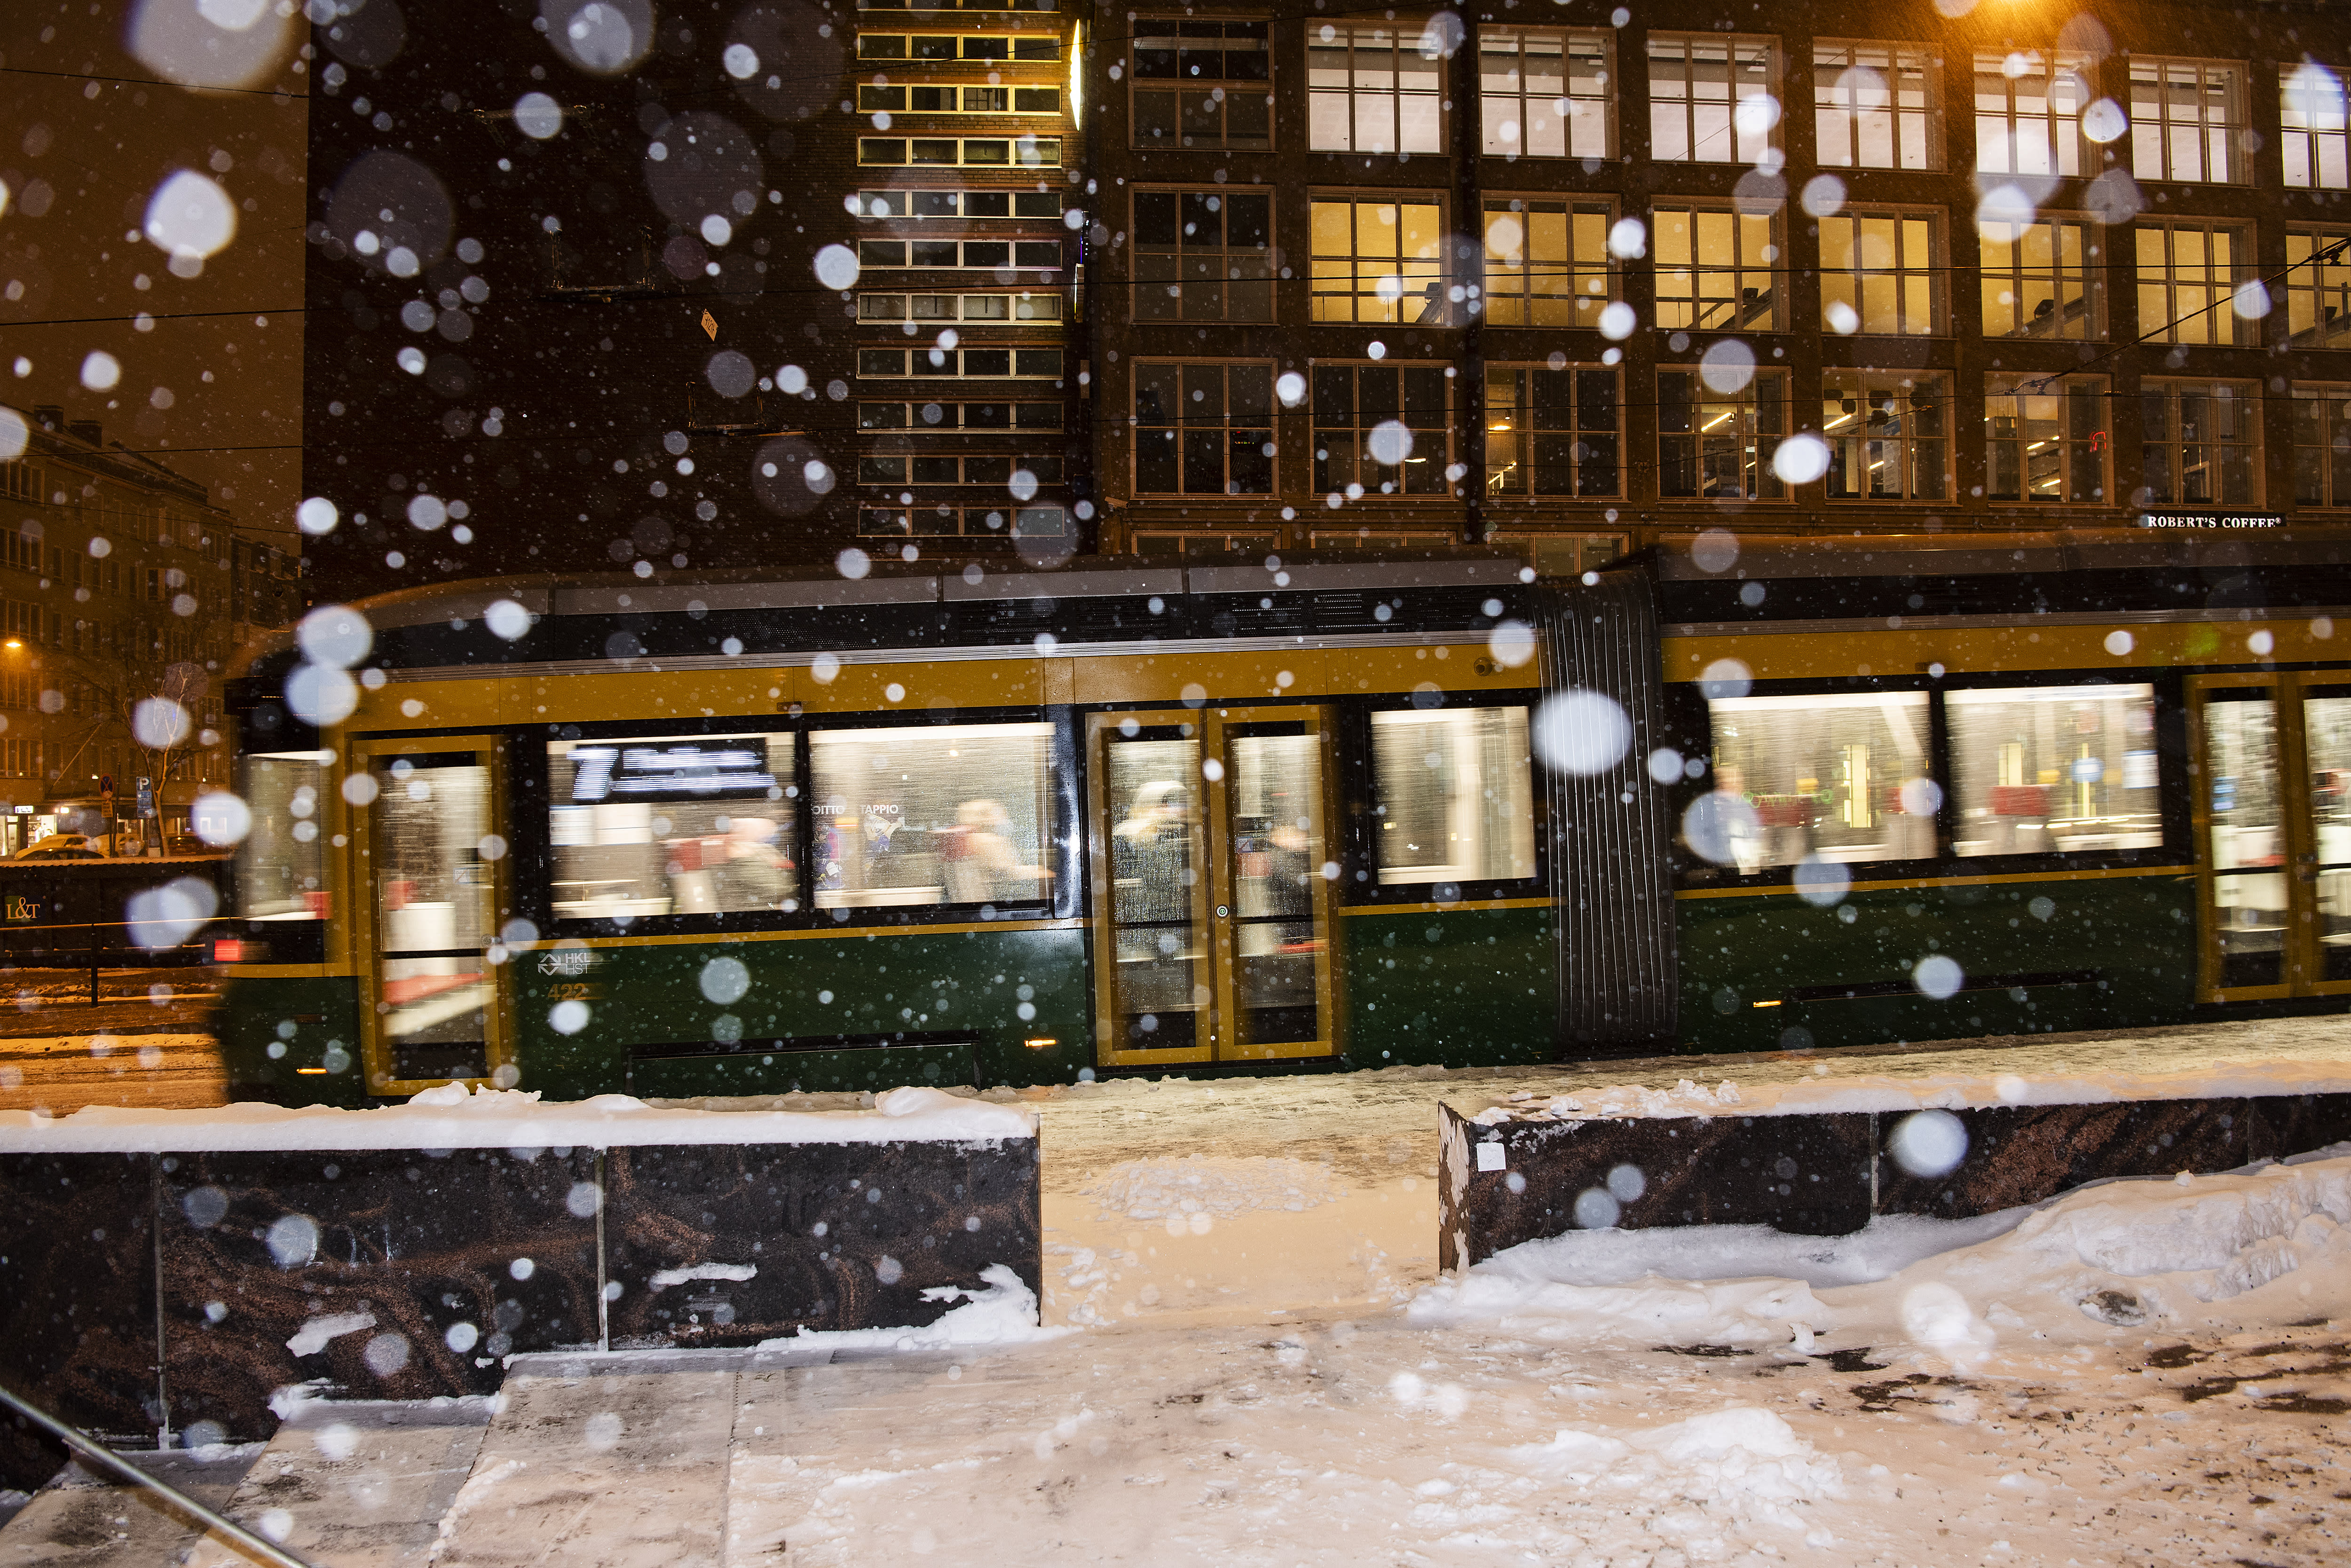 The cold is disrupting bus and tram traffic in Helsinki, some trains are canceled or late